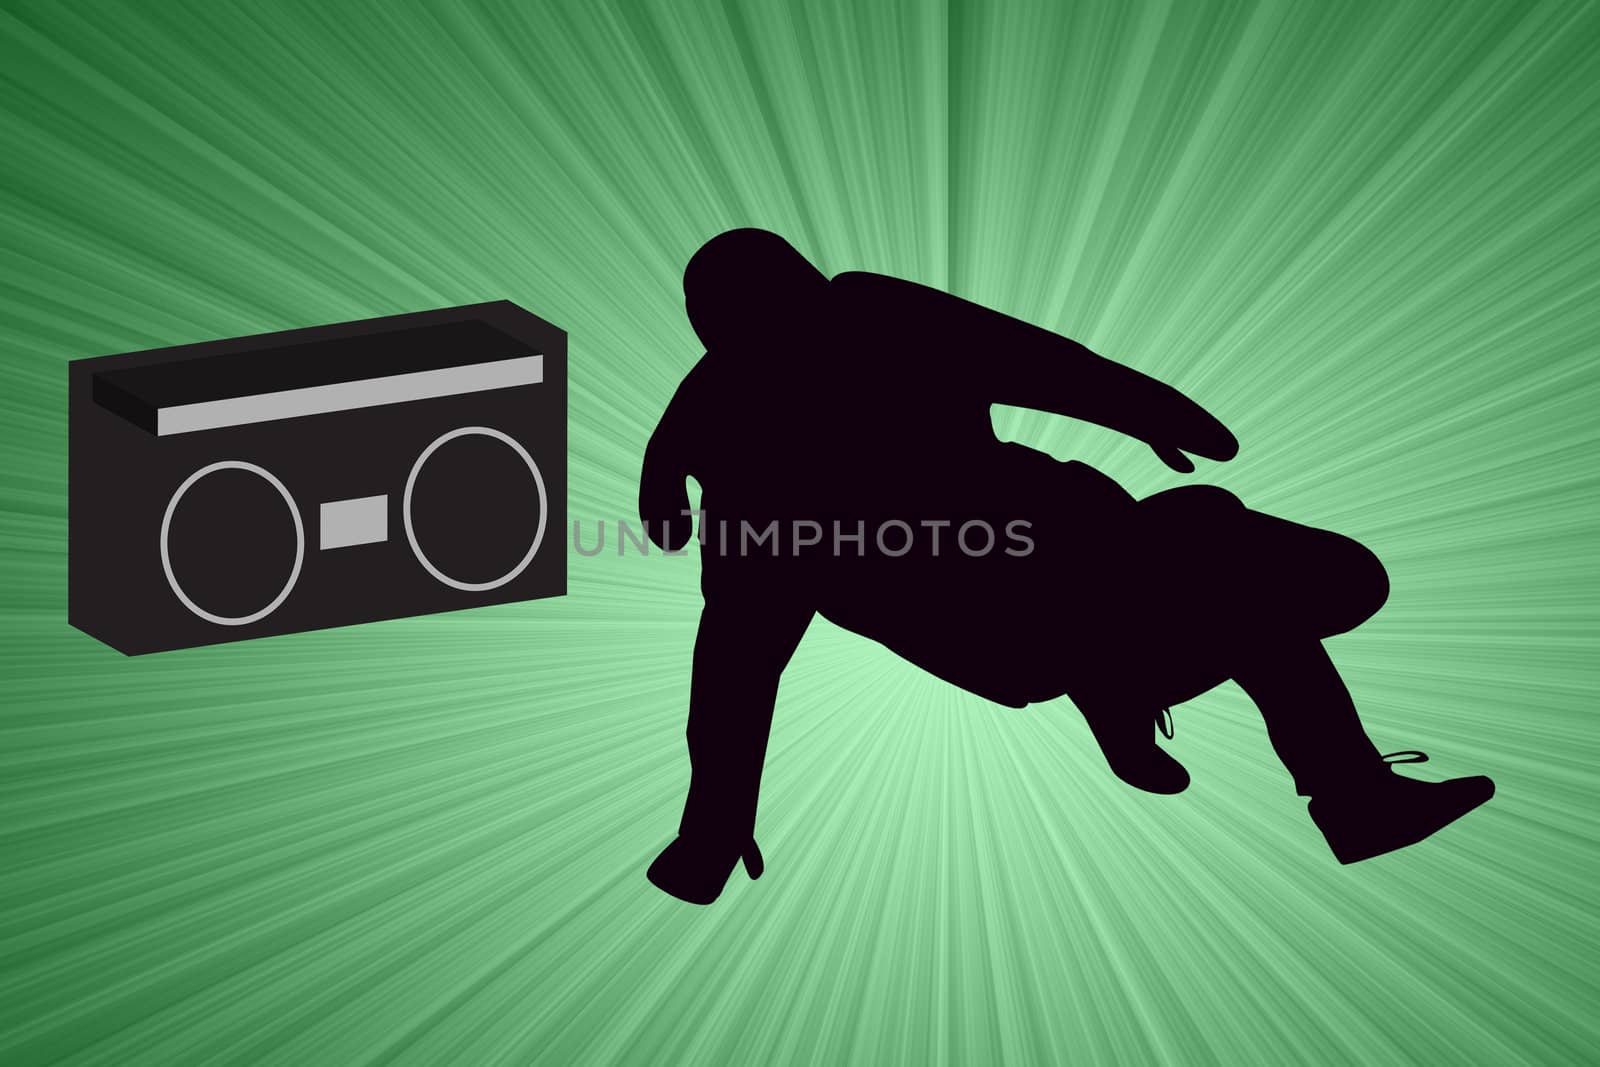 Breakdancer Dancing with Old School Boom Box Silhouette by mwp1969